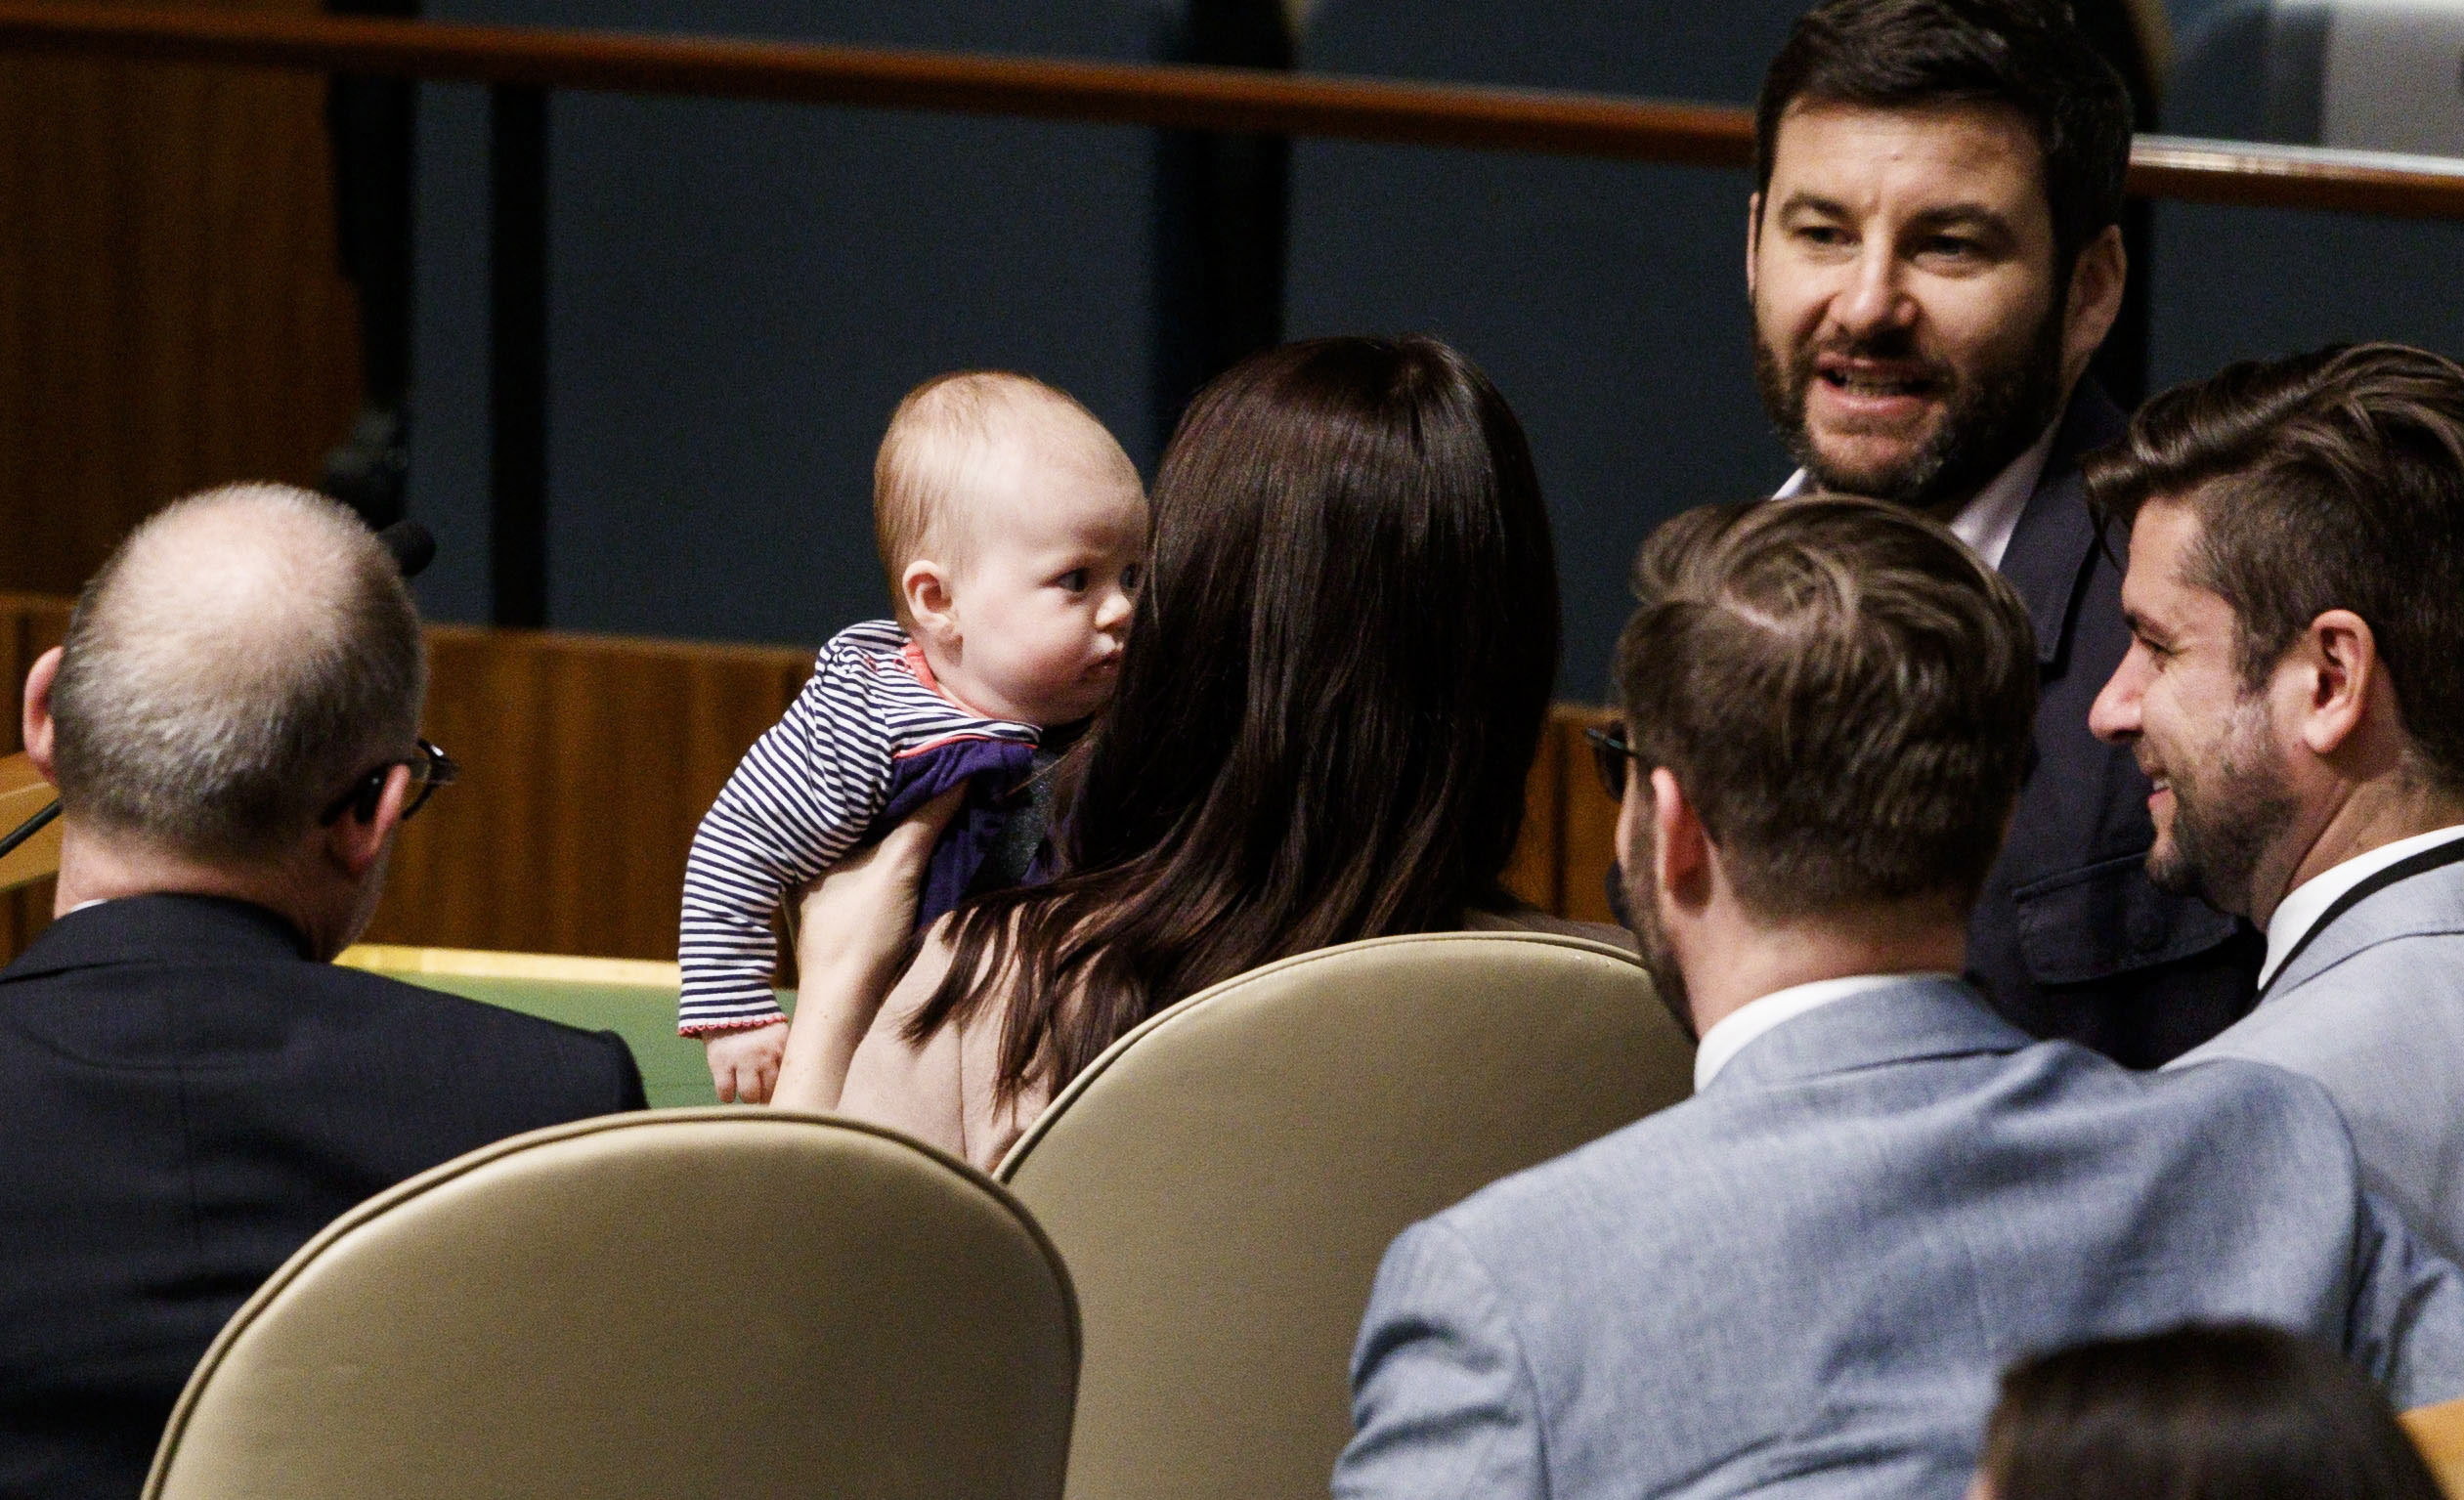 New mum Jacinda Arden appeared at the UN with her partner Clarke Gayford and their daughter Neve